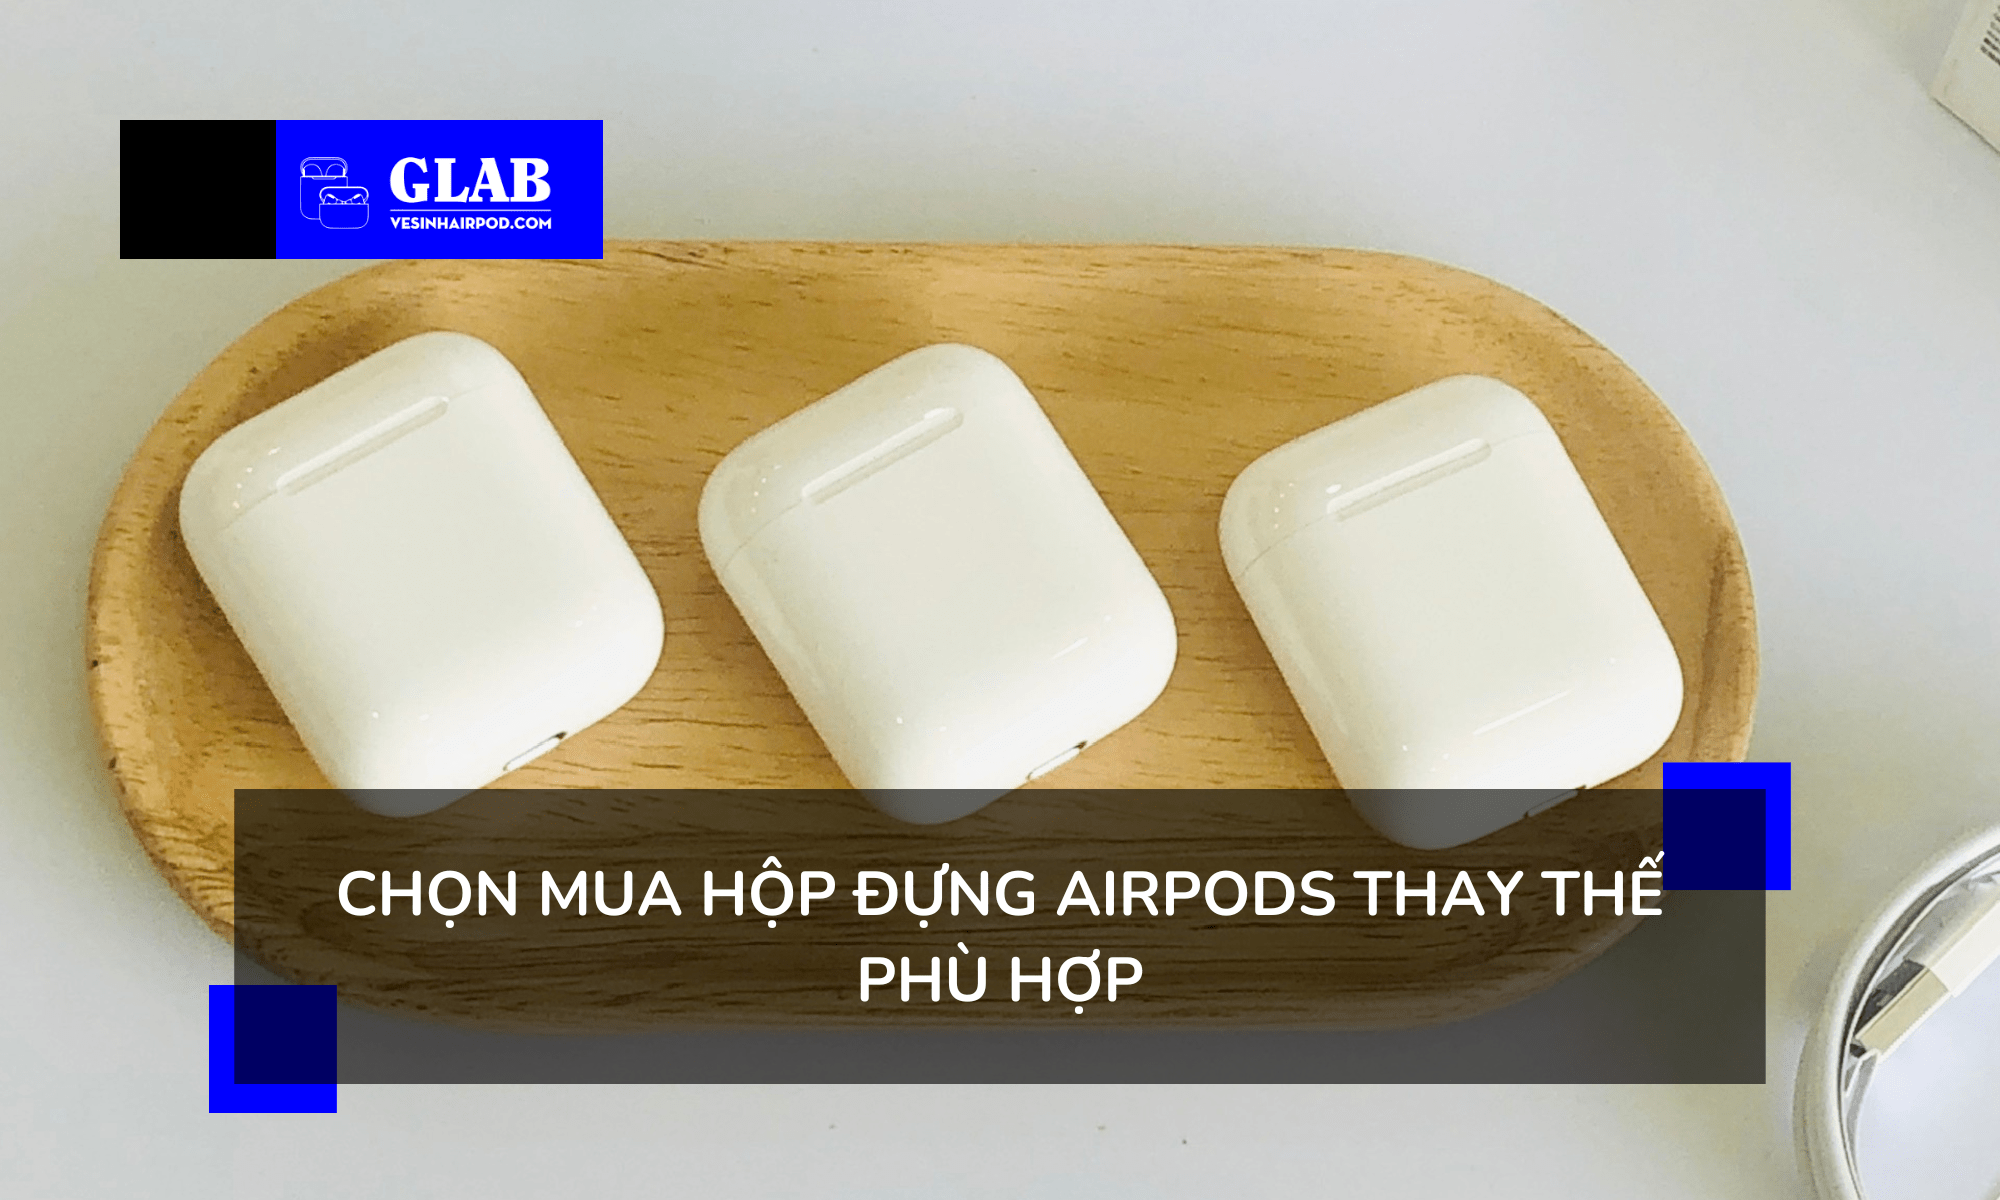 mua-hop-dung-airpods-thay-the